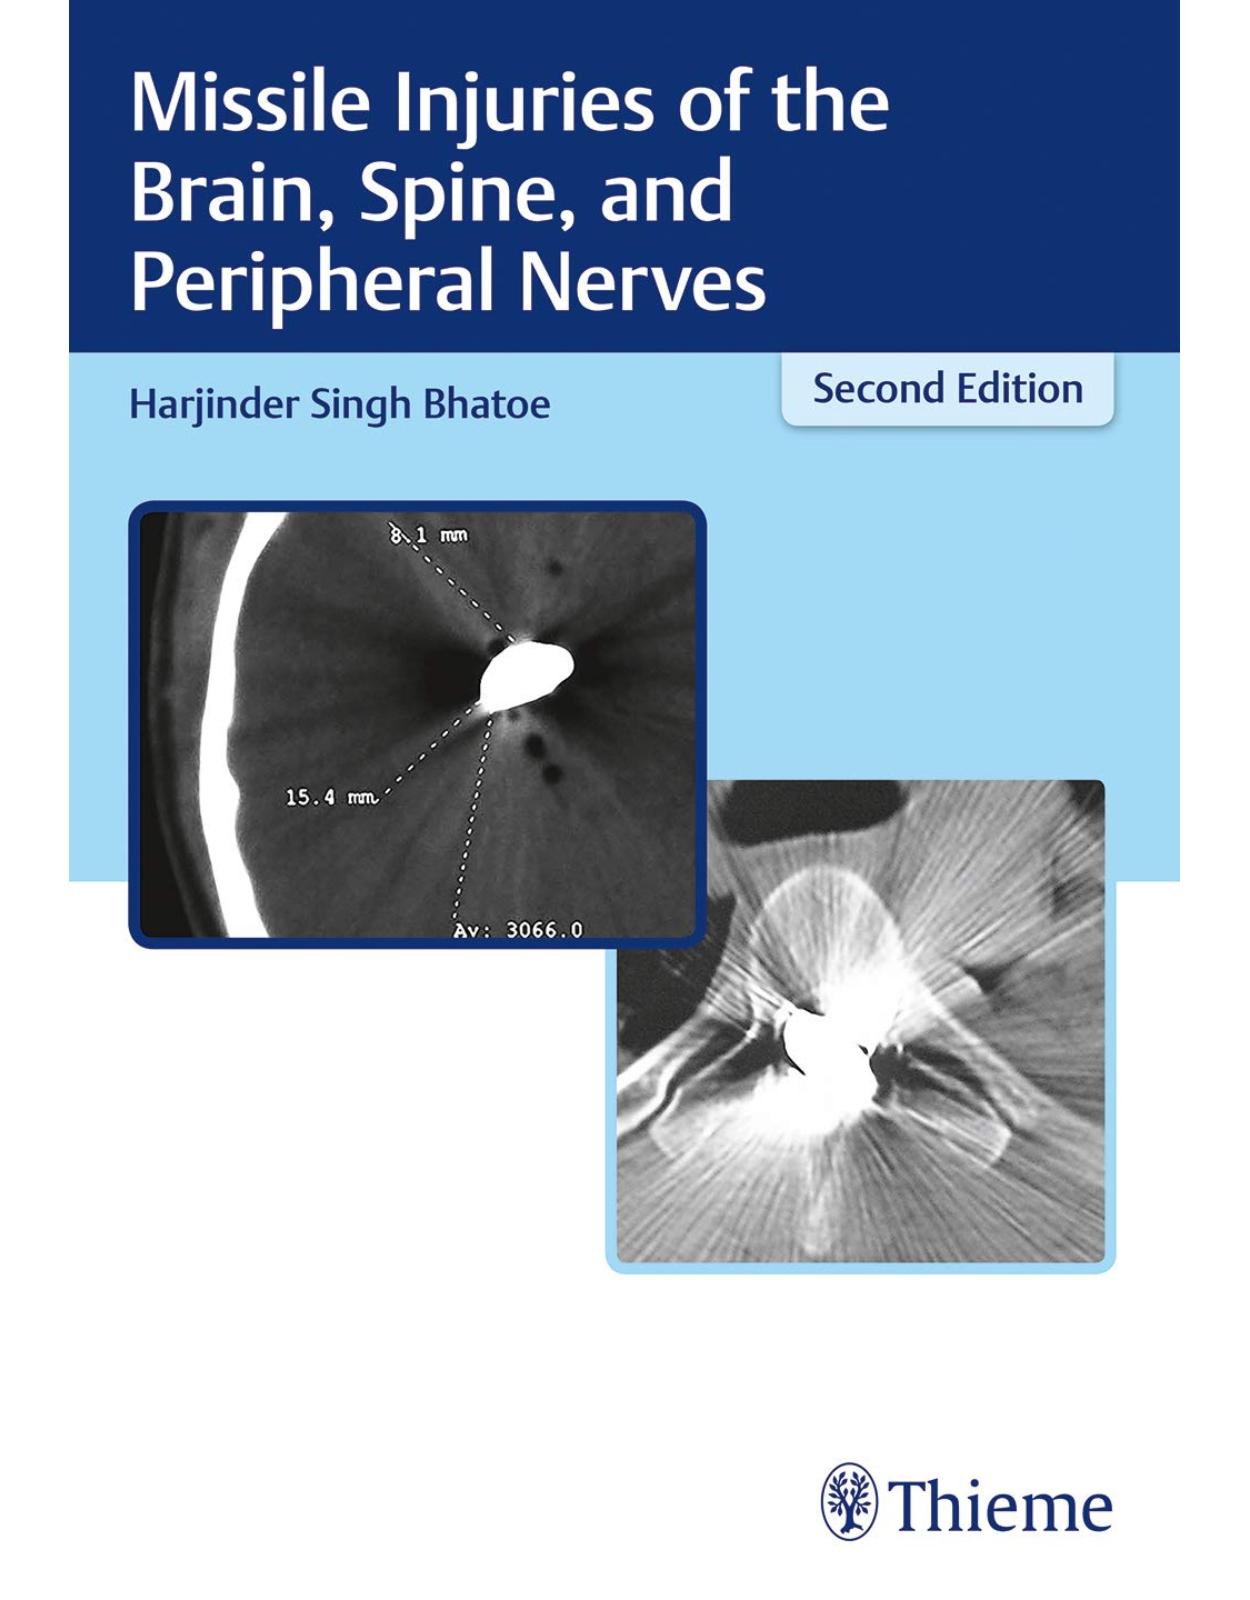 Missile Injuries of the Brain, Spine, and Peripheral Nerves